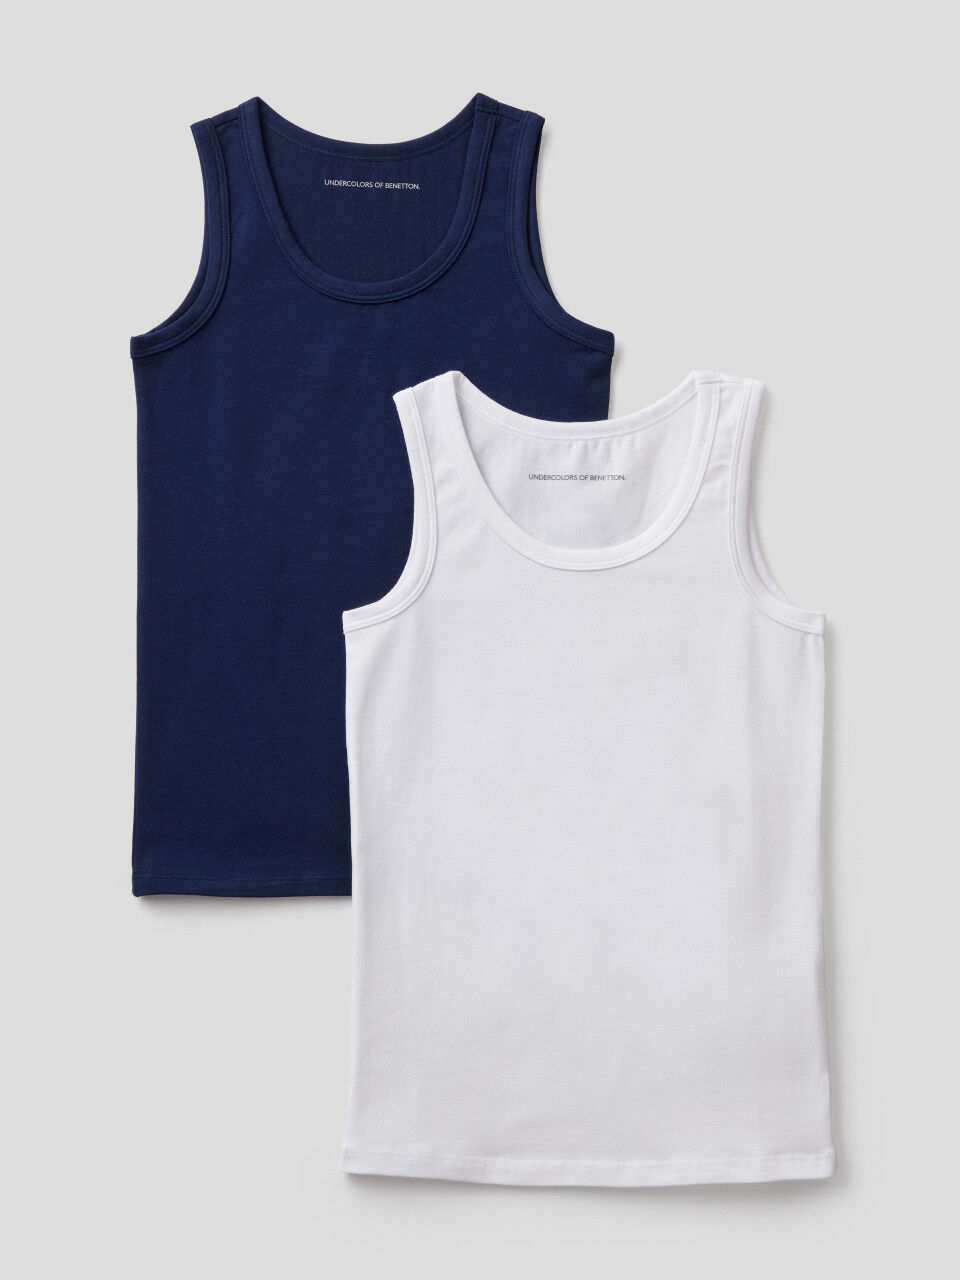 Ayshie Toddler Boys’ Cotton Tank Tops 4-Pack Little Kids’ Comfy Undershirts fits 2-8 Years 